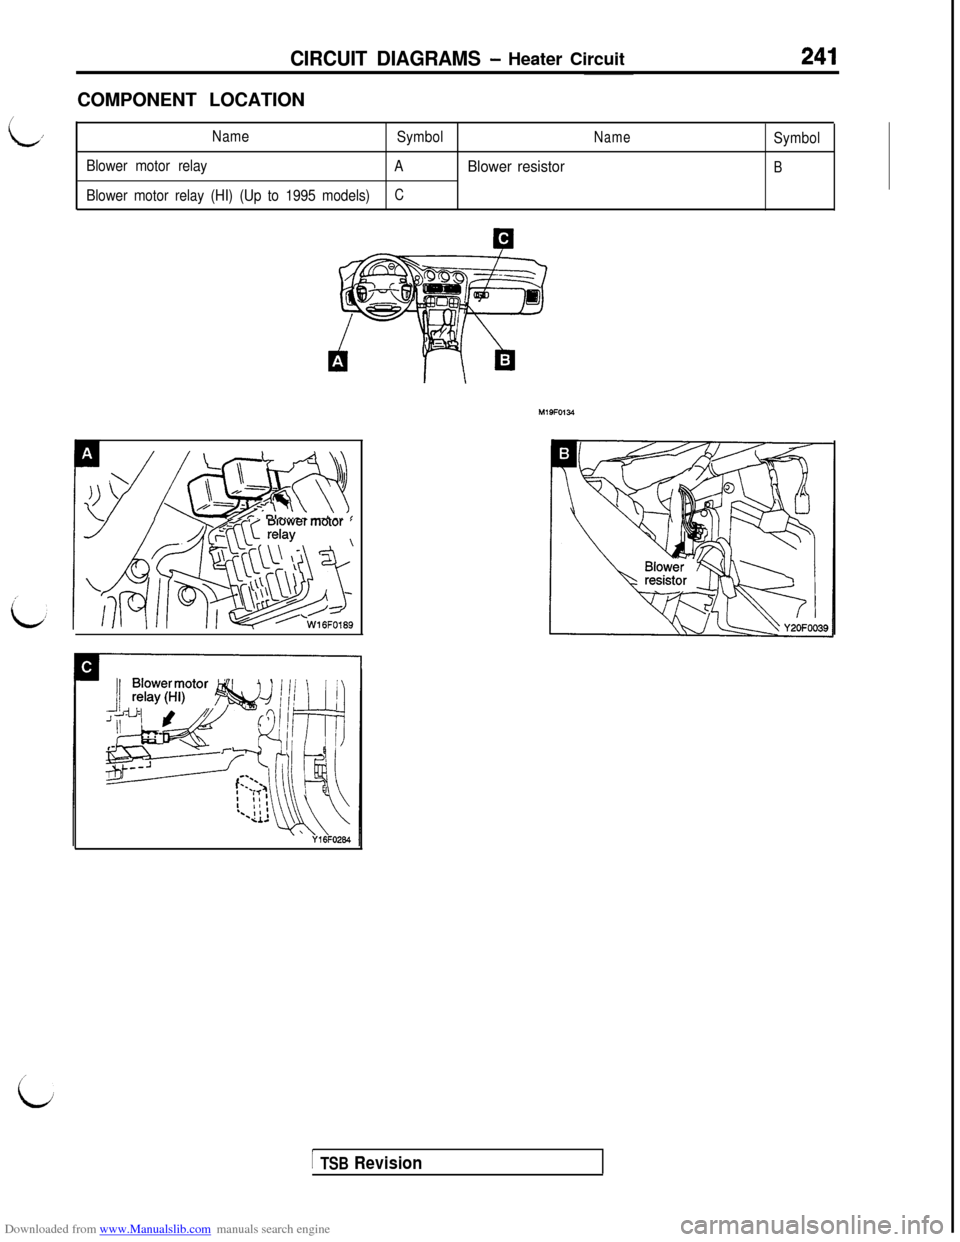 MITSUBISHI 3000GT 1995 2.G Workshop Manual Downloaded from www.Manualslib.com manuals search engine CIRCUIT DIAGRAMS - Heater CircuitCOMPONENT LOCATION
,Name
SymbolNameSymbol
Blower motor relay
A
Blower resistorB
Blower motor relay (HI) (Up to